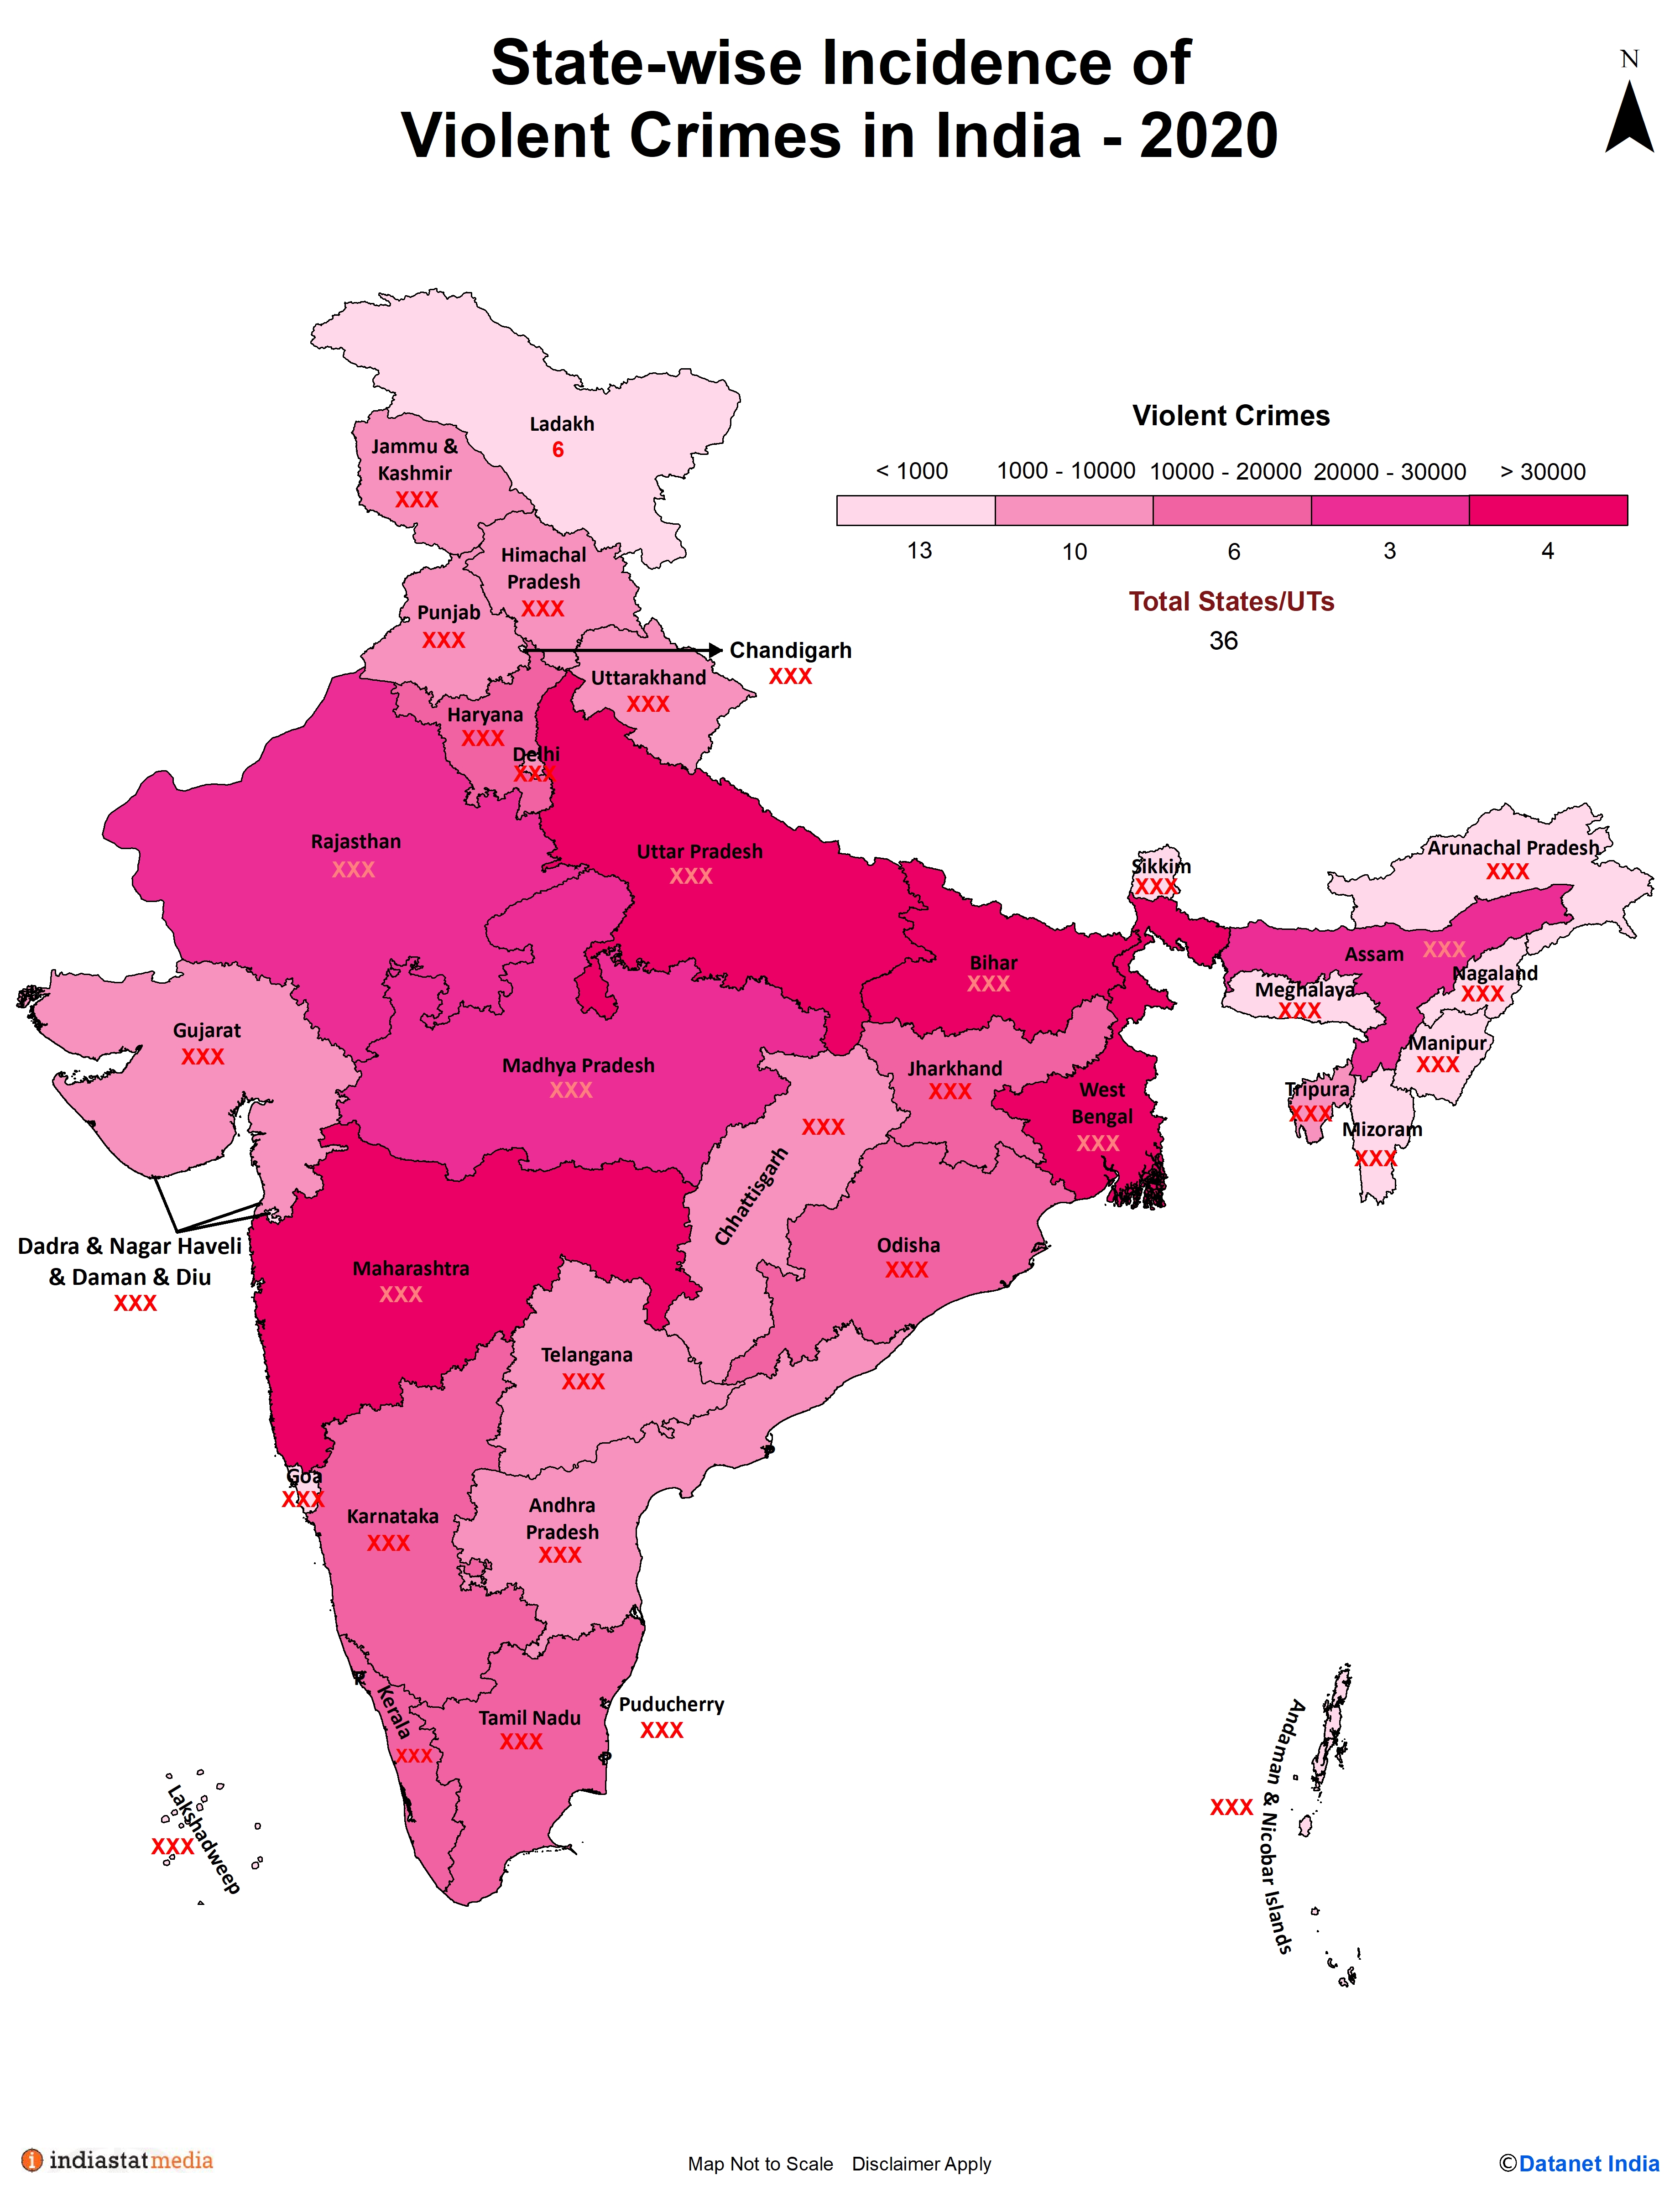 State-wise Incidence of Violent Crimes in India (2020)